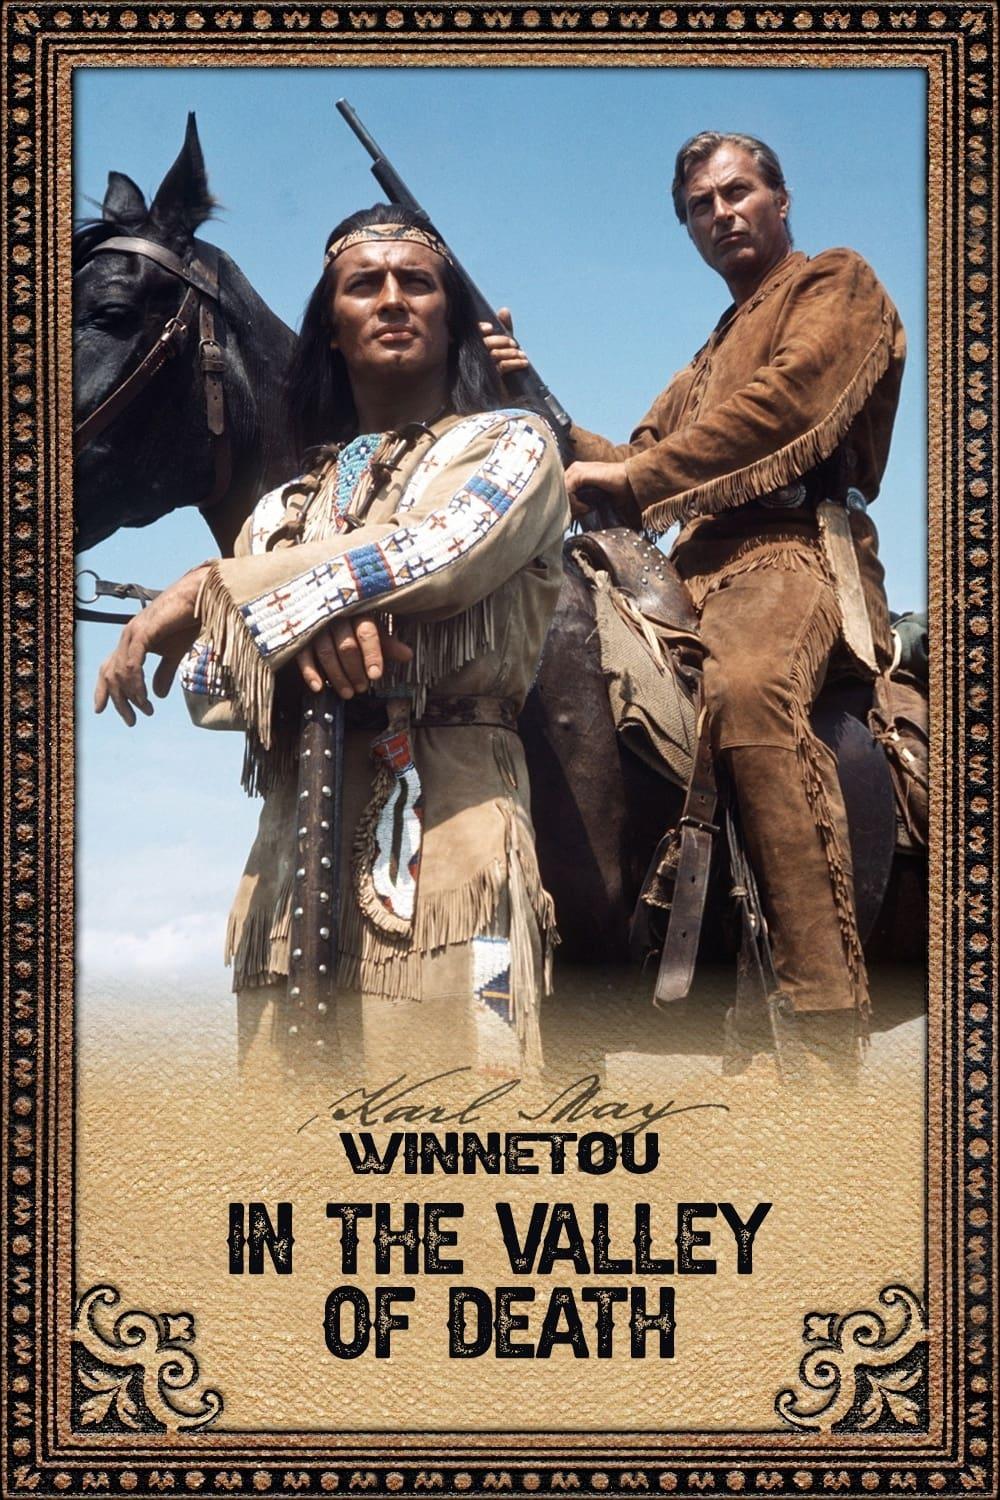 The Valley of Death poster